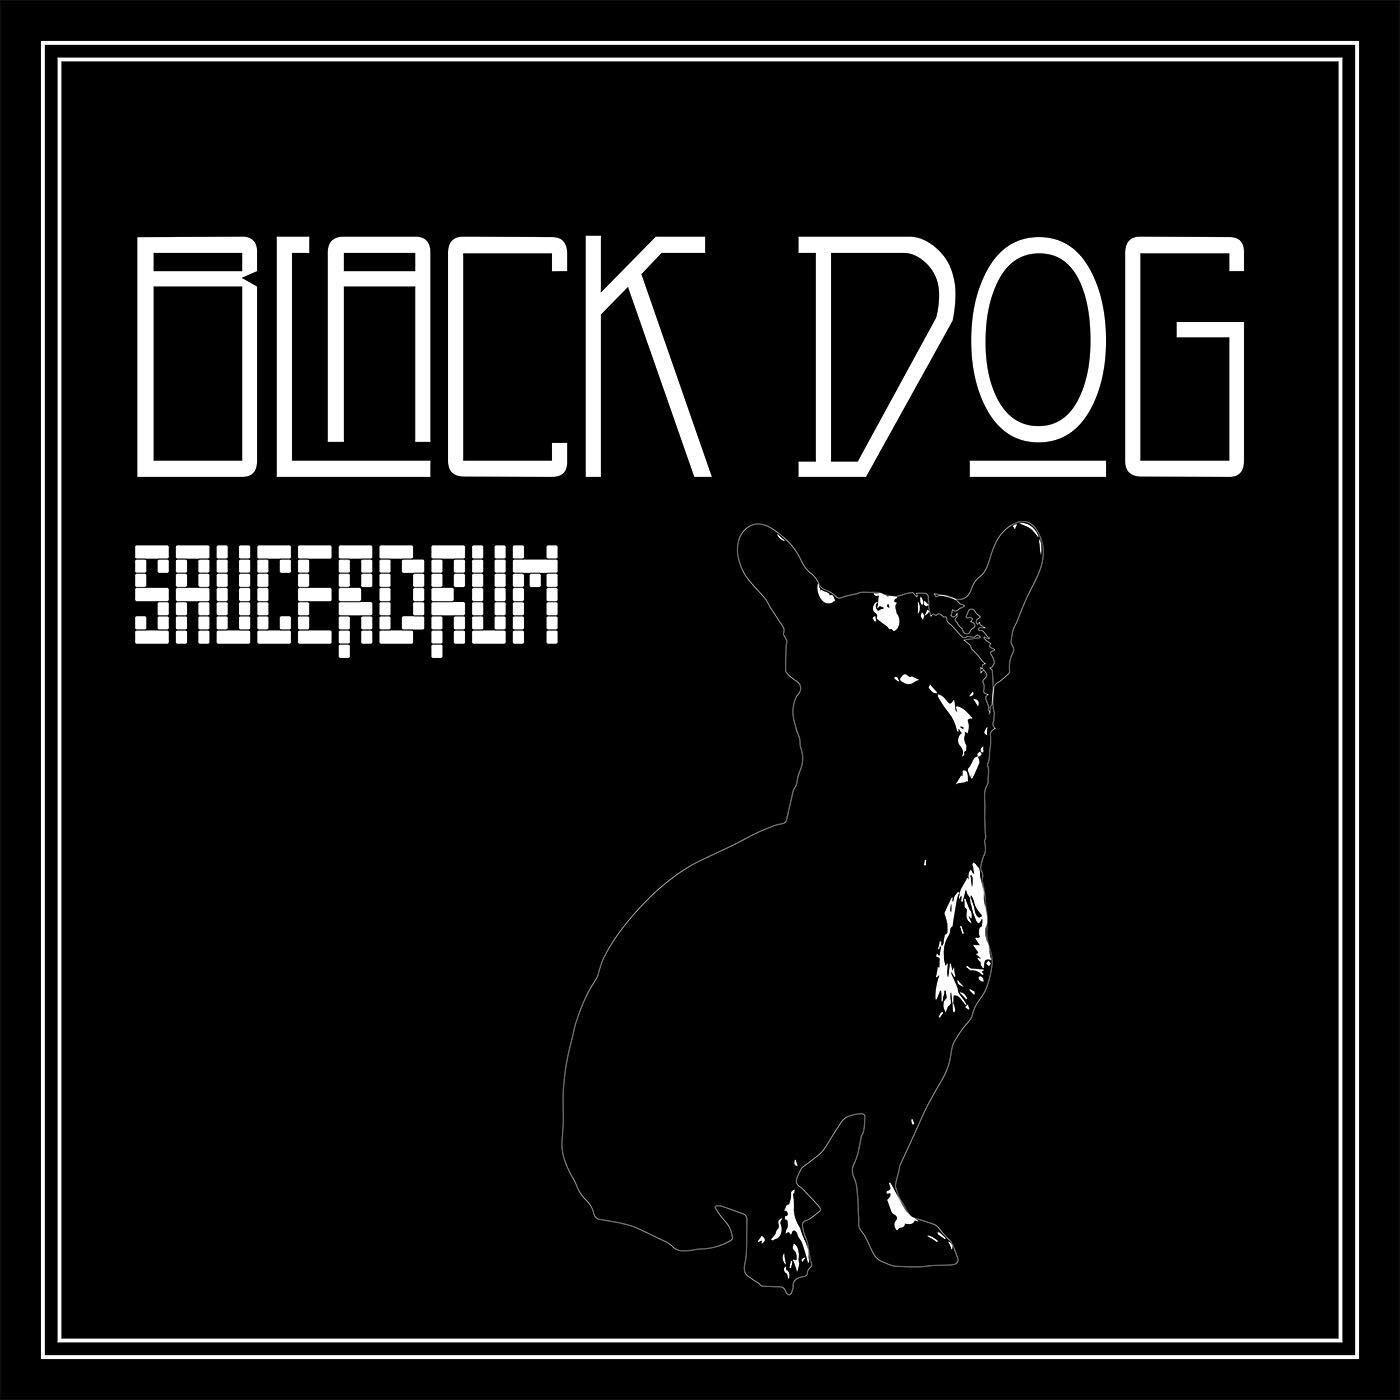 My remix of Led Zeppelin&rsquo;s Black Dog is only available on Soundcloud. Check it! #ledzeppelin #remix #remixes #saucerdrum #house #housemusic #midtempo #110bpm